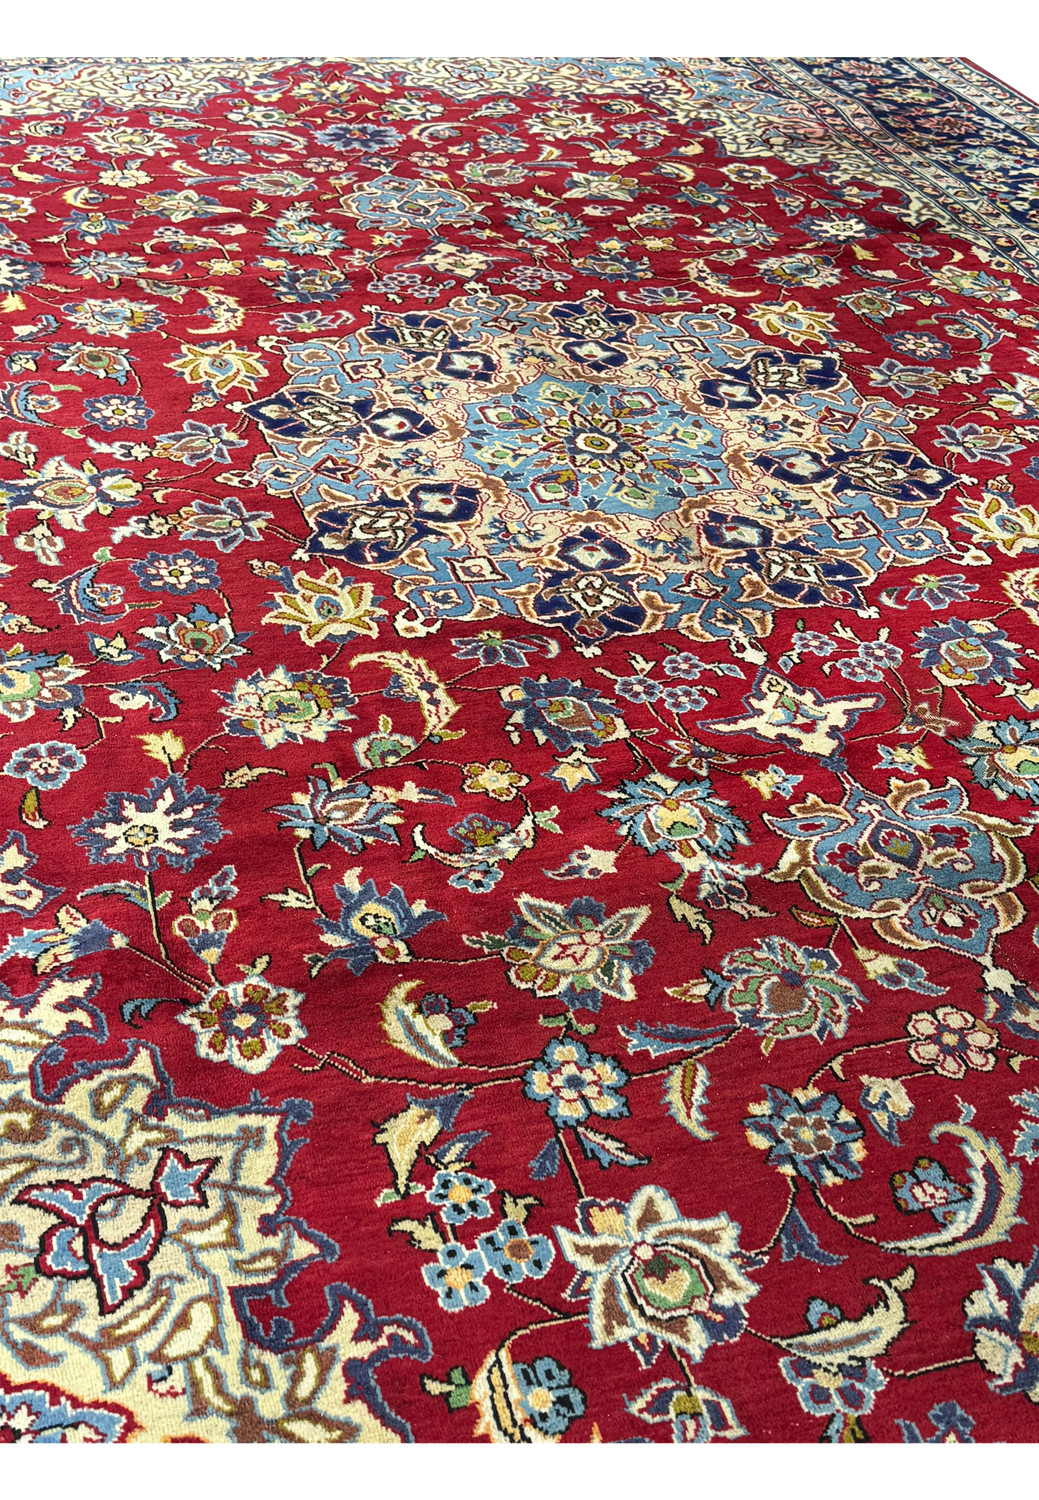 Angled view of a 10 x 15'6" Persian Isfahan rug, featuring a crimson field with a blue central medallion, ornate floral motifs, and a dark navy border